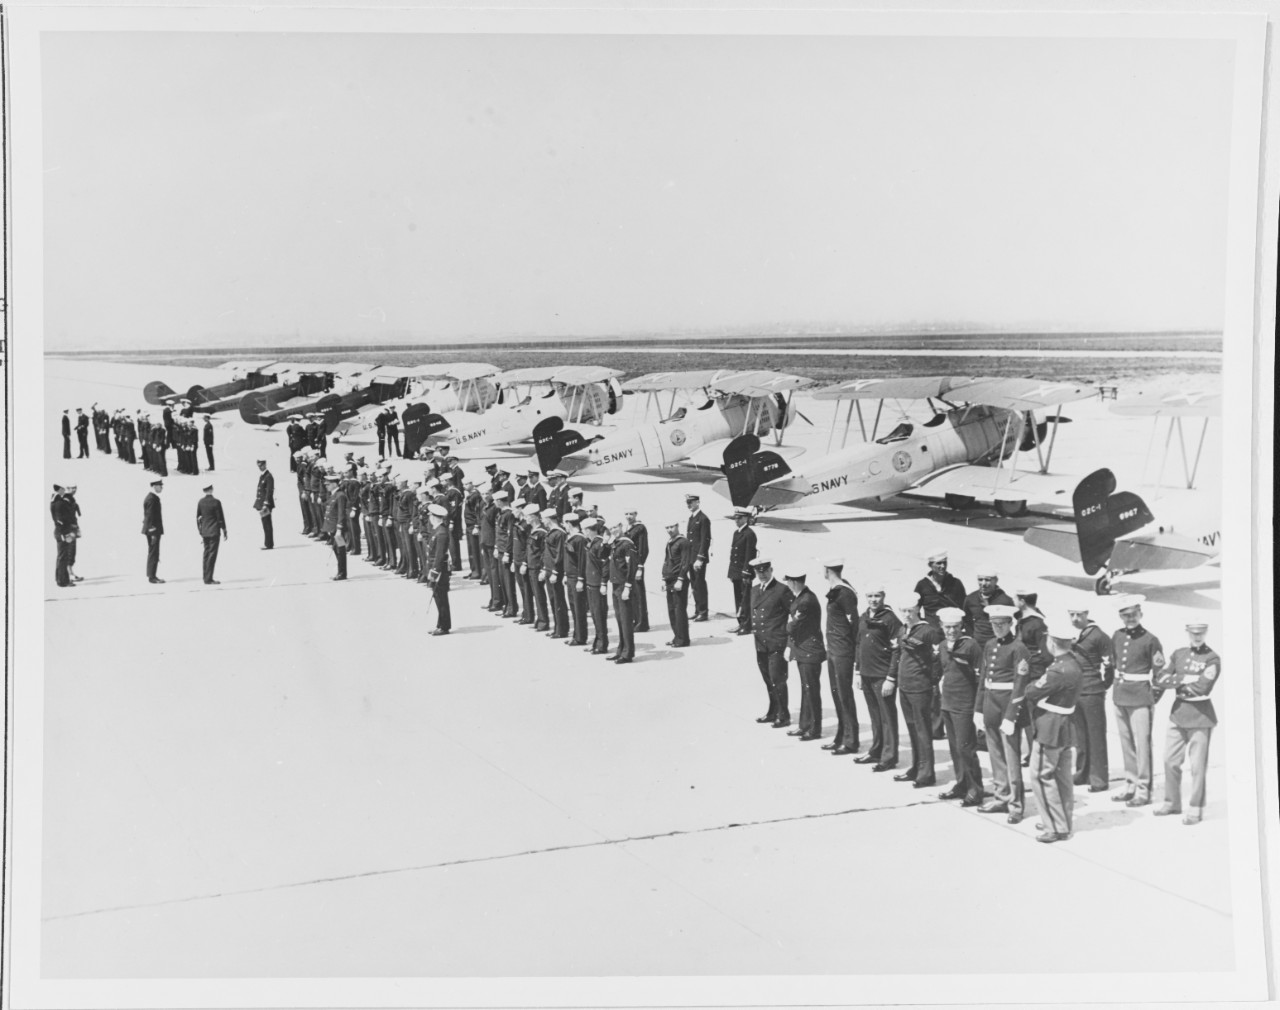 The Naval Reserve Air Squadron and regular Navy "Station Keepers" at the Naval Reserve Air Base, Floyd Bennett Field, New York.